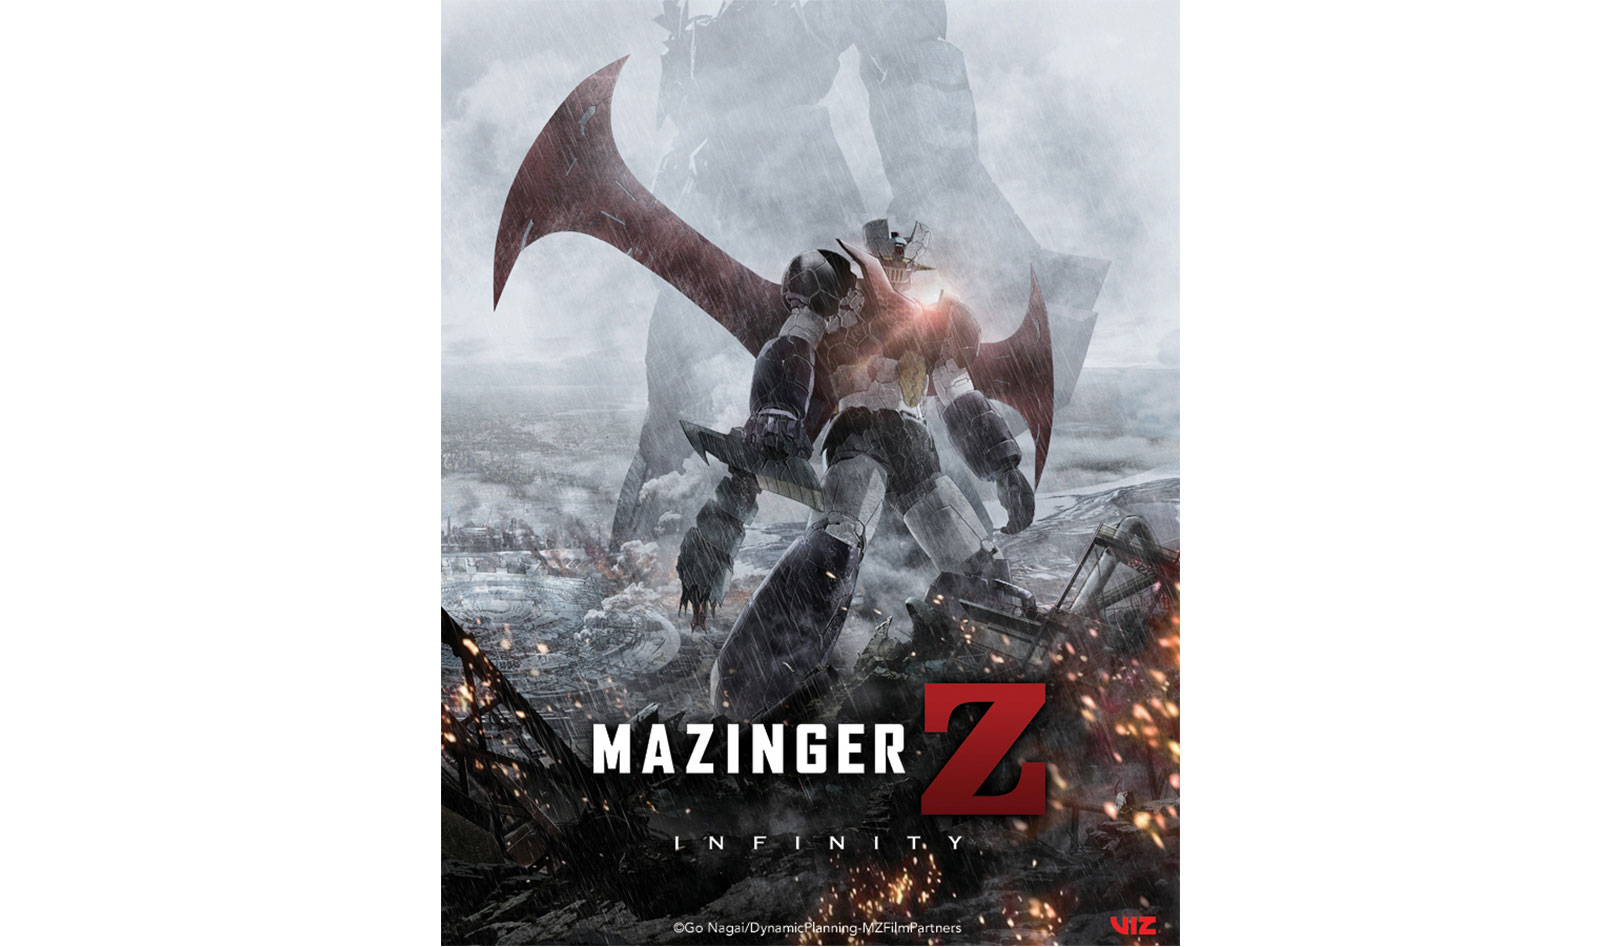 Mazinger Z: INFINITY Debuts in US Cinemas This February